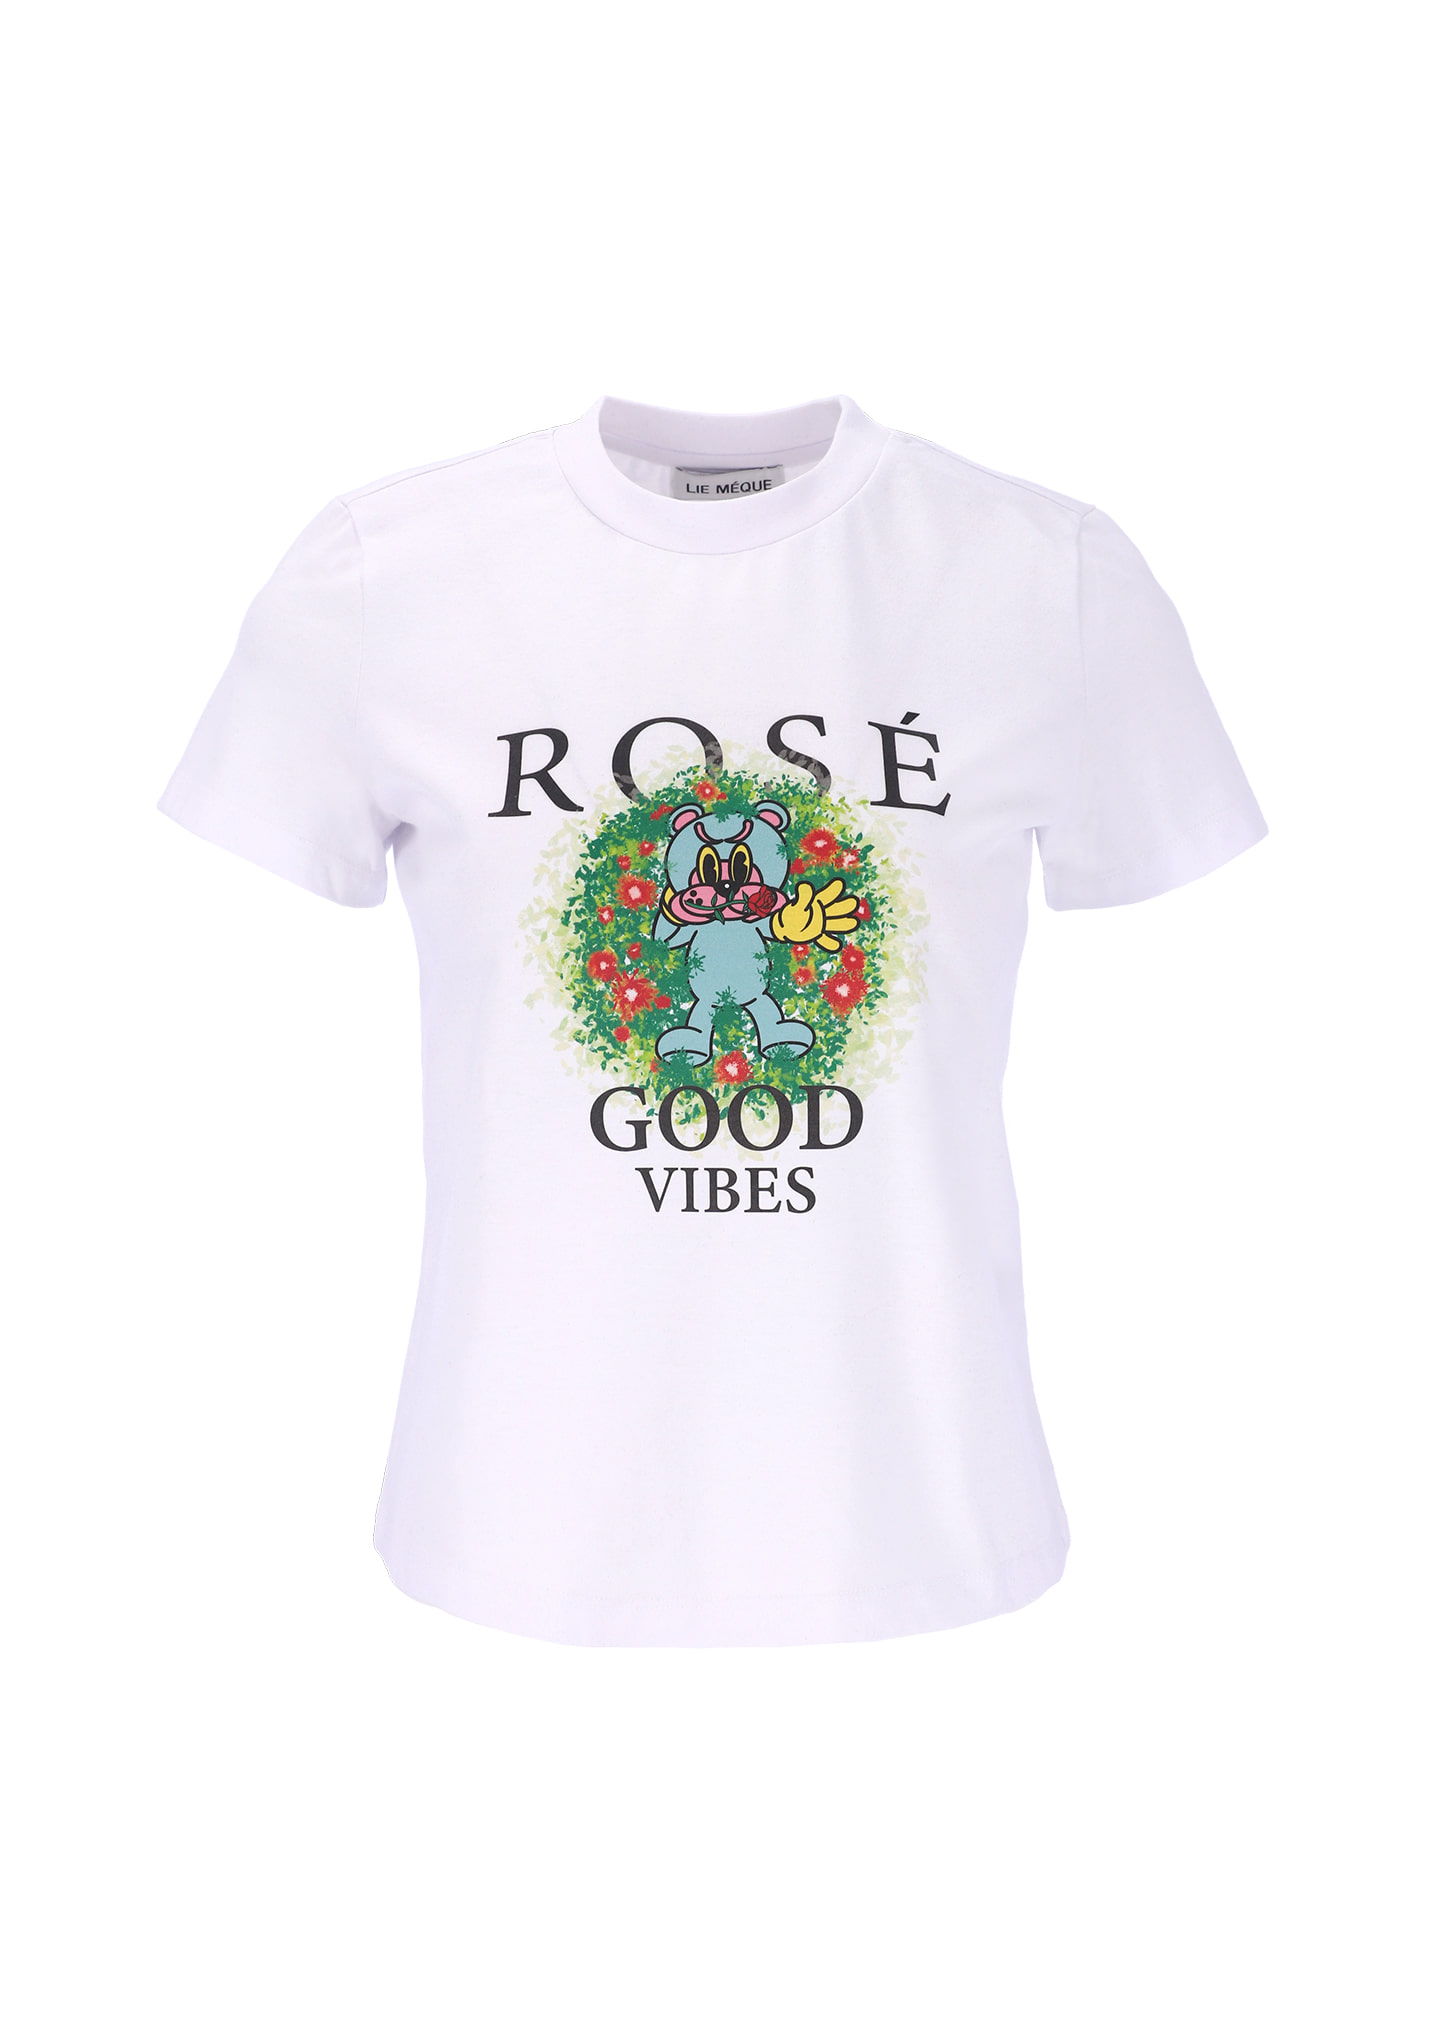 Good Vibes Meque T-shirt